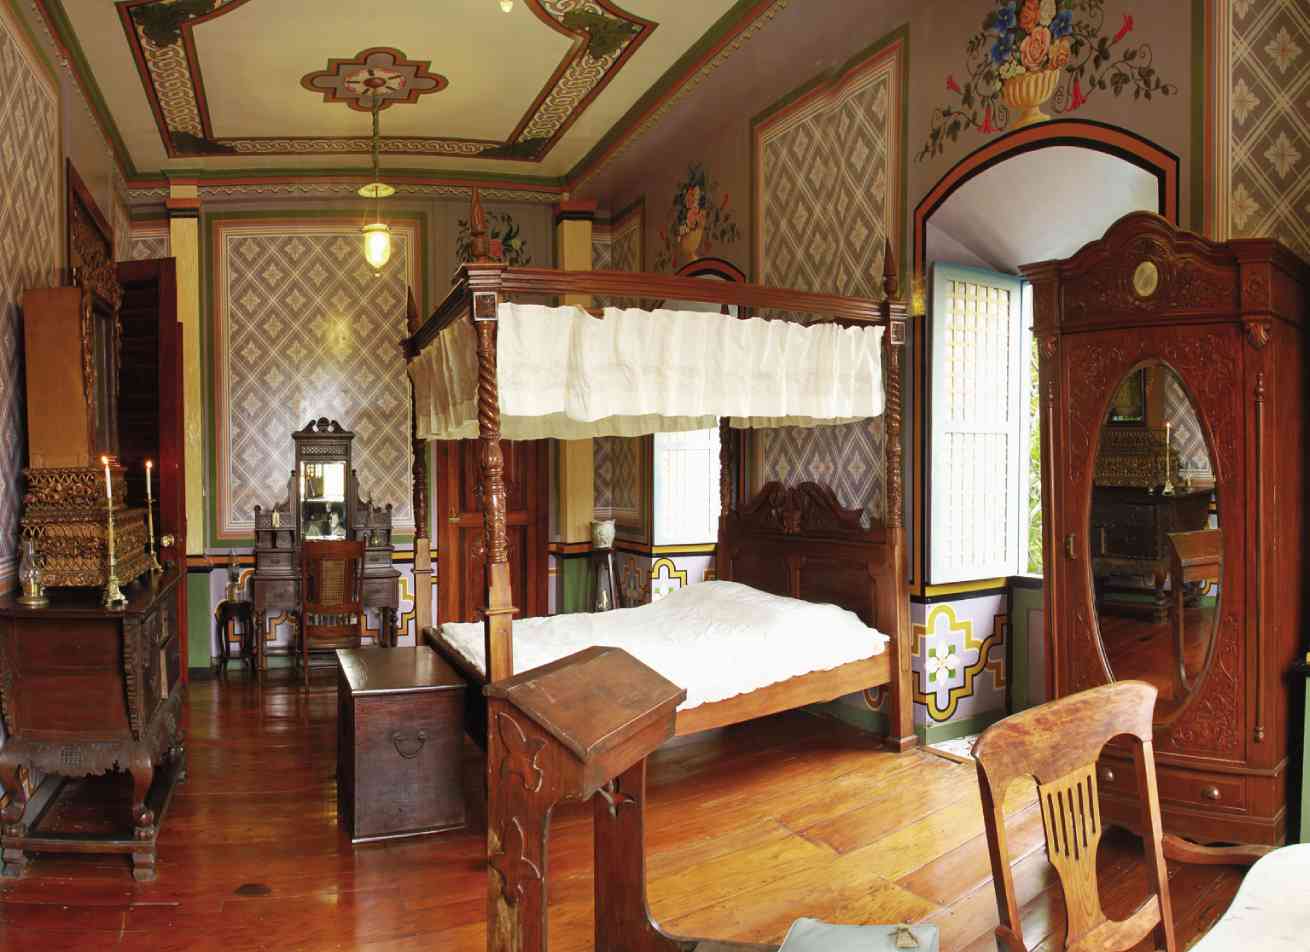 Taal’s 19th-century house: History made interesting | Lifestyle.INQ